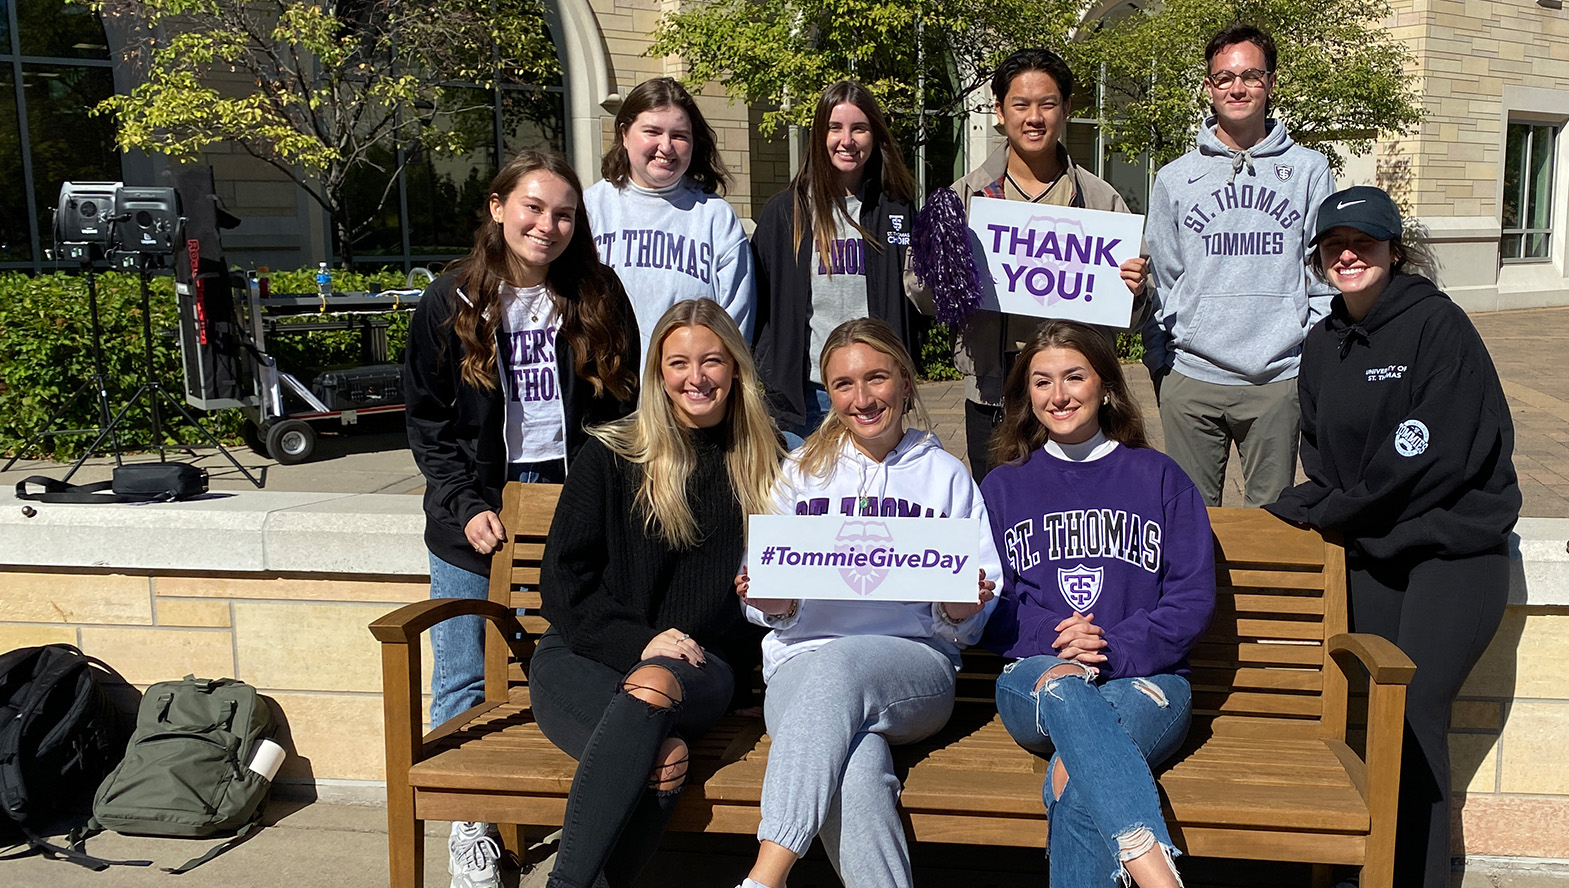 Students sitting on a bench with thank you signs